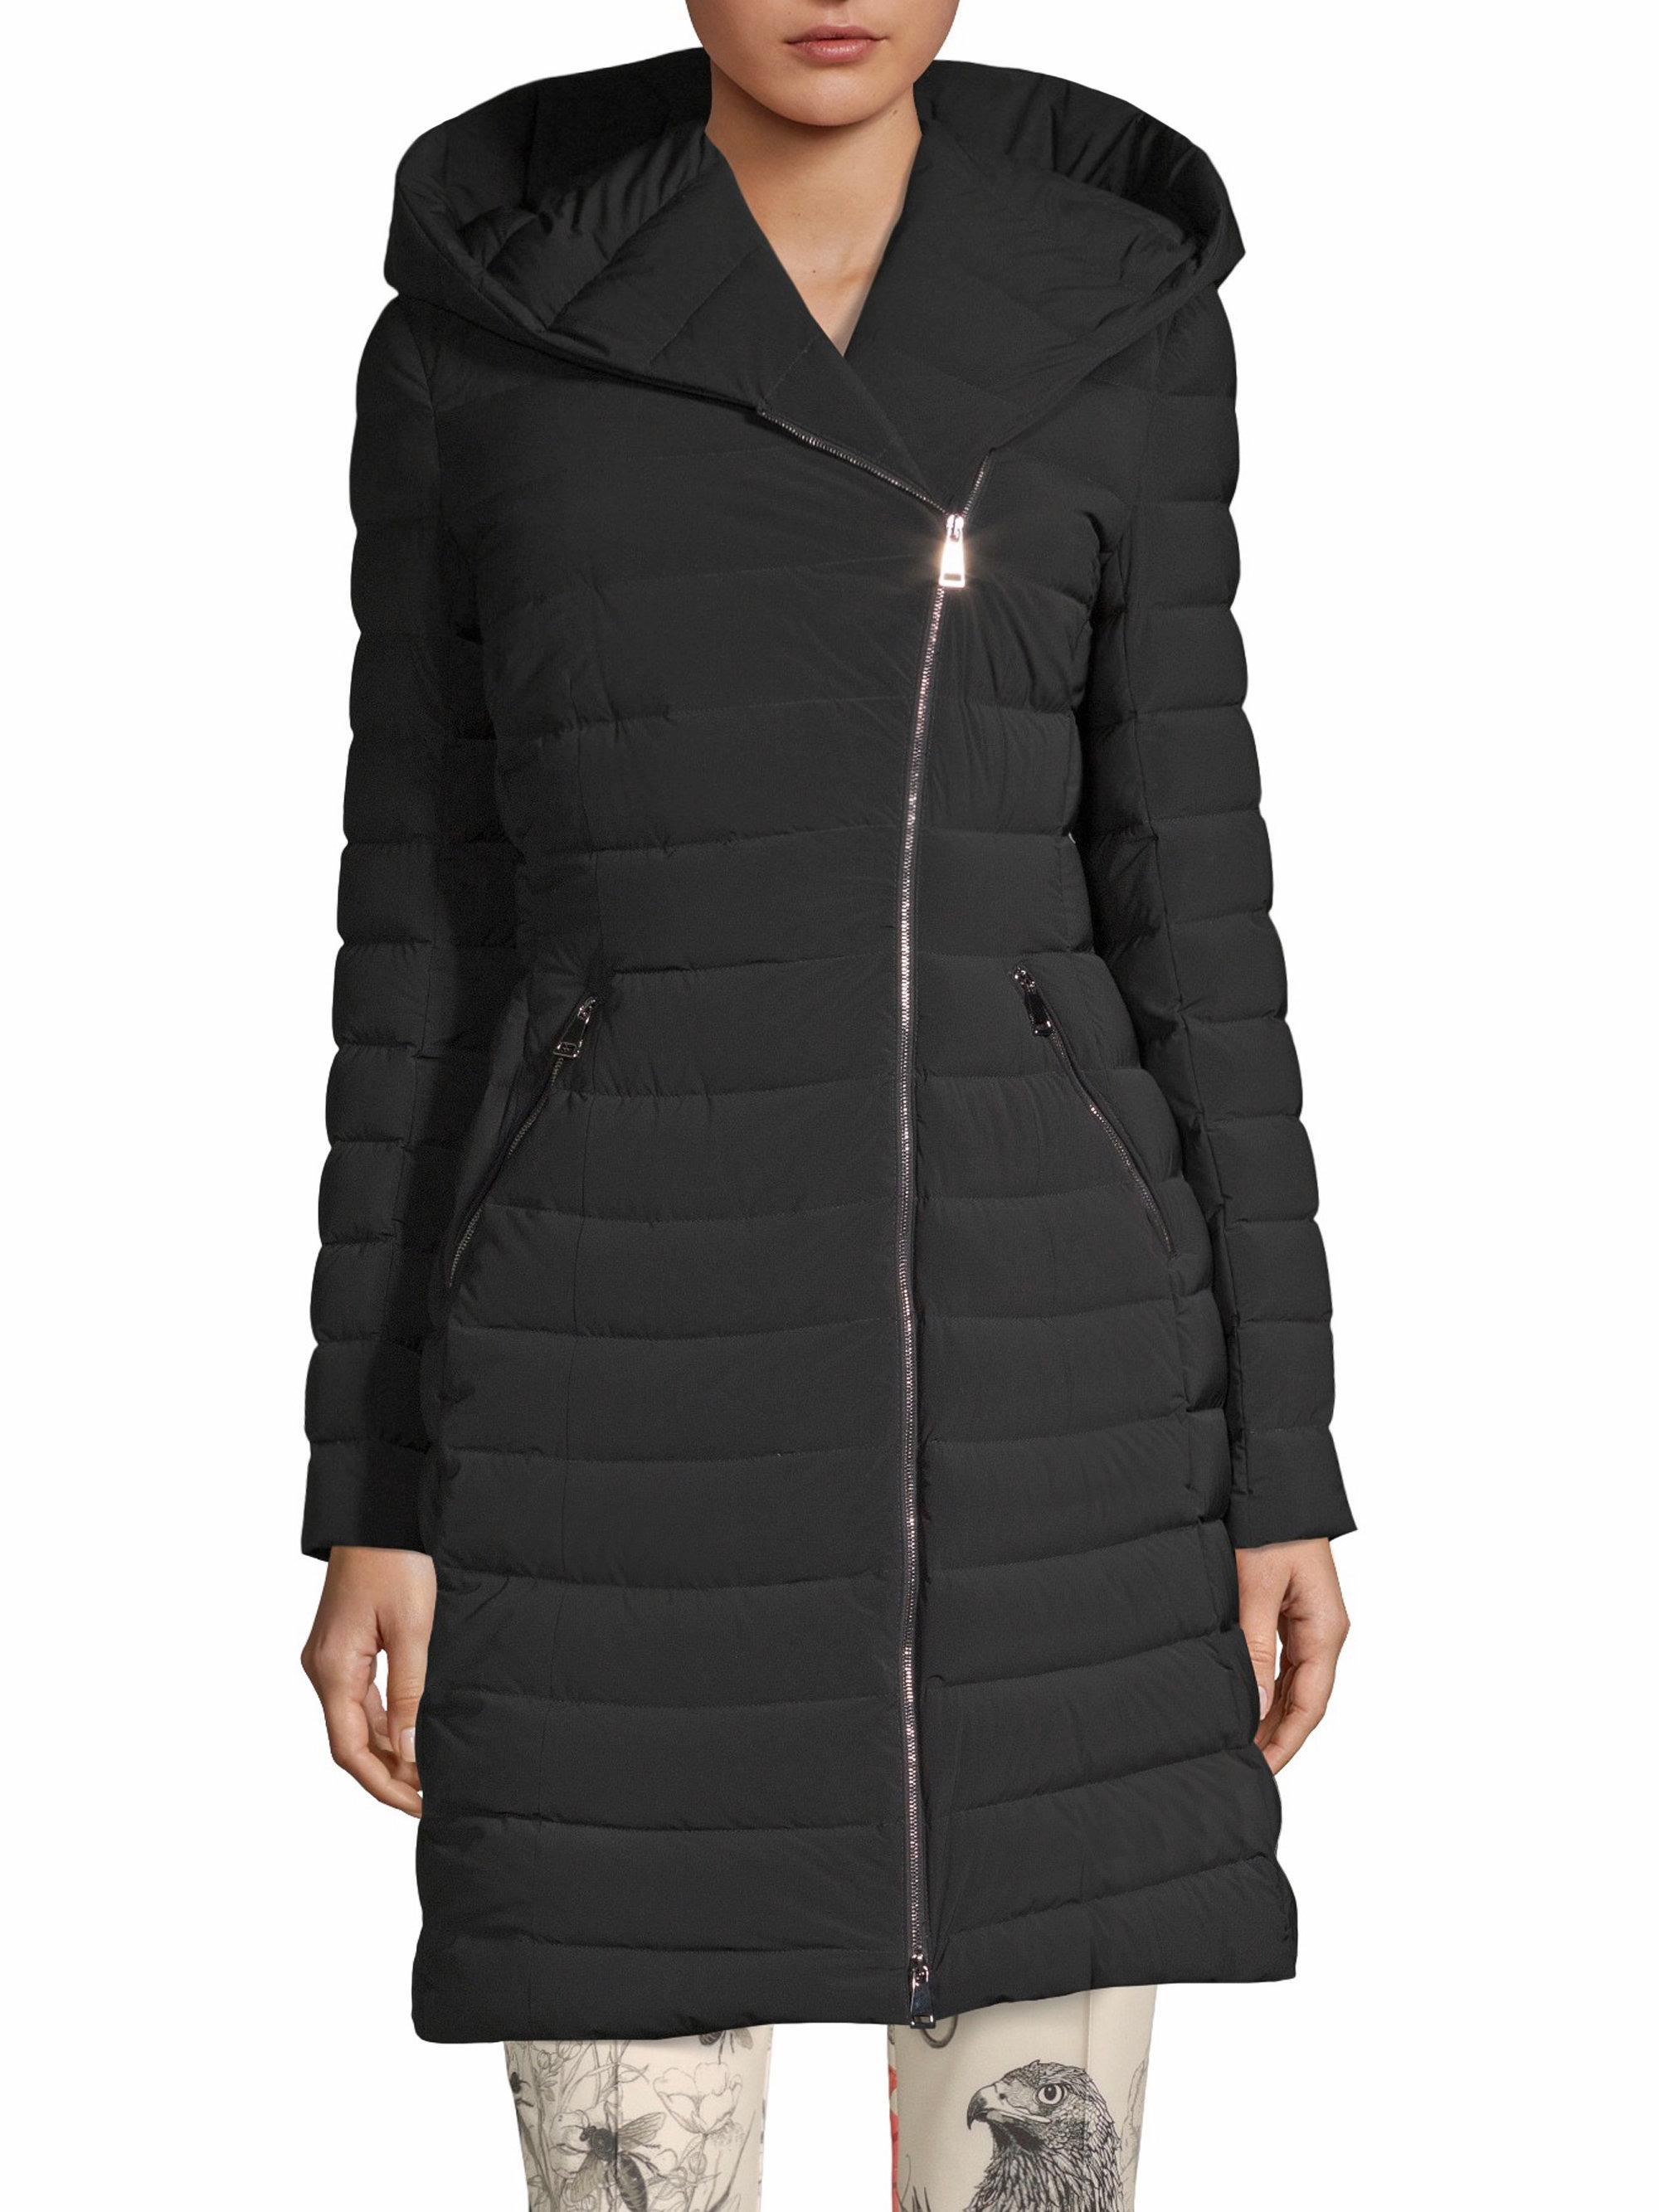 Moncler Synthetic Barge Hooded Puffer Coat in Black - Lyst